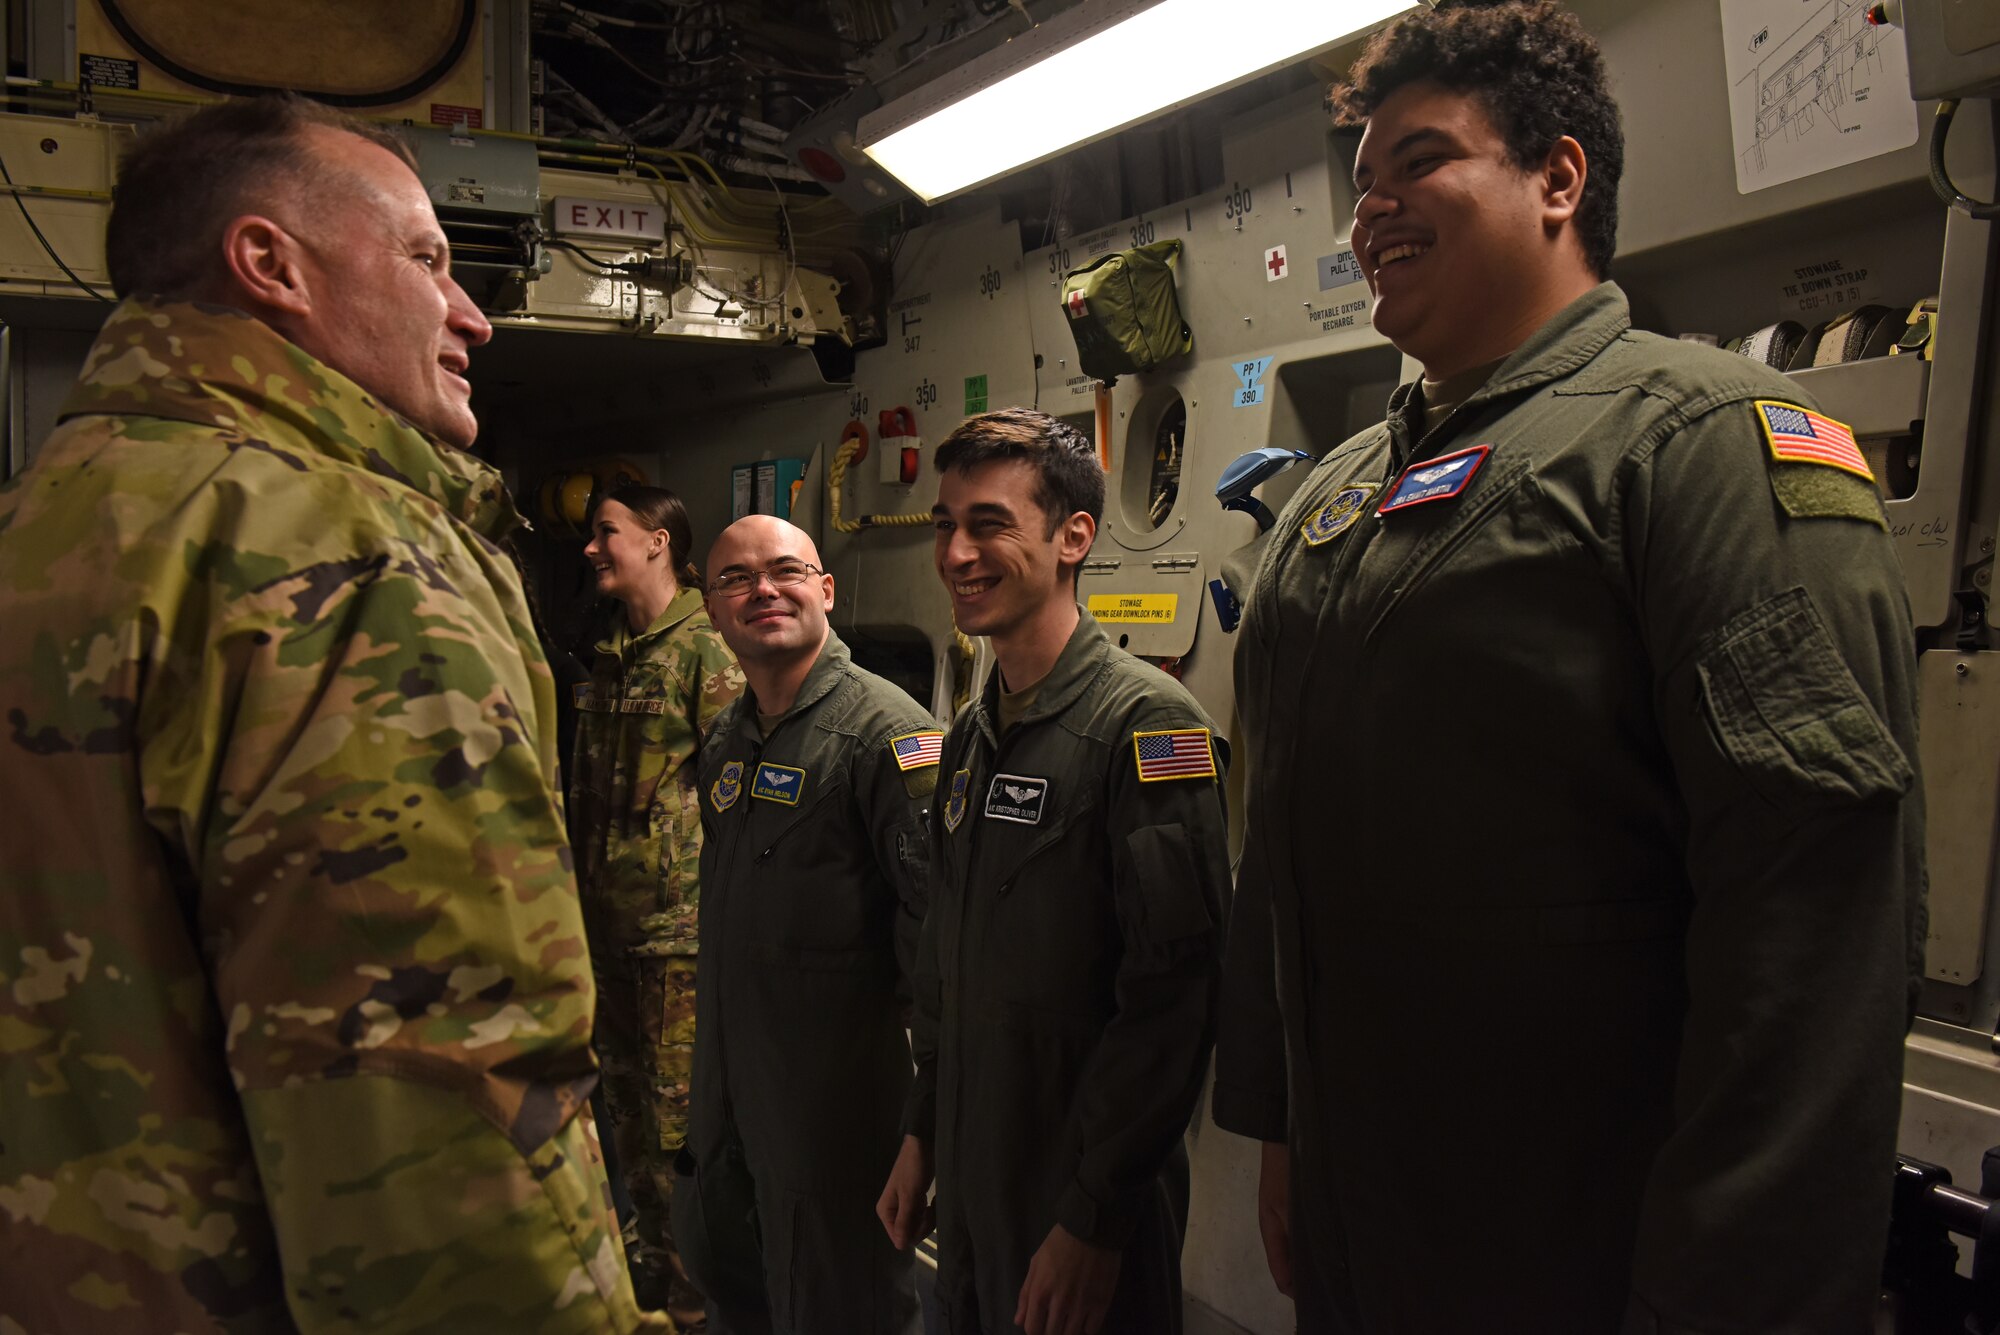 U.S. Air Force Maj. Gen. Thad Bibb, 18th Air Force commander, talks with 62nd Airlift Wing Airmen during his visit at Joint Base Lewis-McChord, Washington, March 14, 2022. Bibb and U.S. Air Force Chief Master Sgt. Chad Bickley, 18th AF command chief, spent two days visiting 62nd AW units and recognized several of the wing’s outstanding performers during their time. (U.S. Air Force photo/Senior Airman Zoe Thacker)